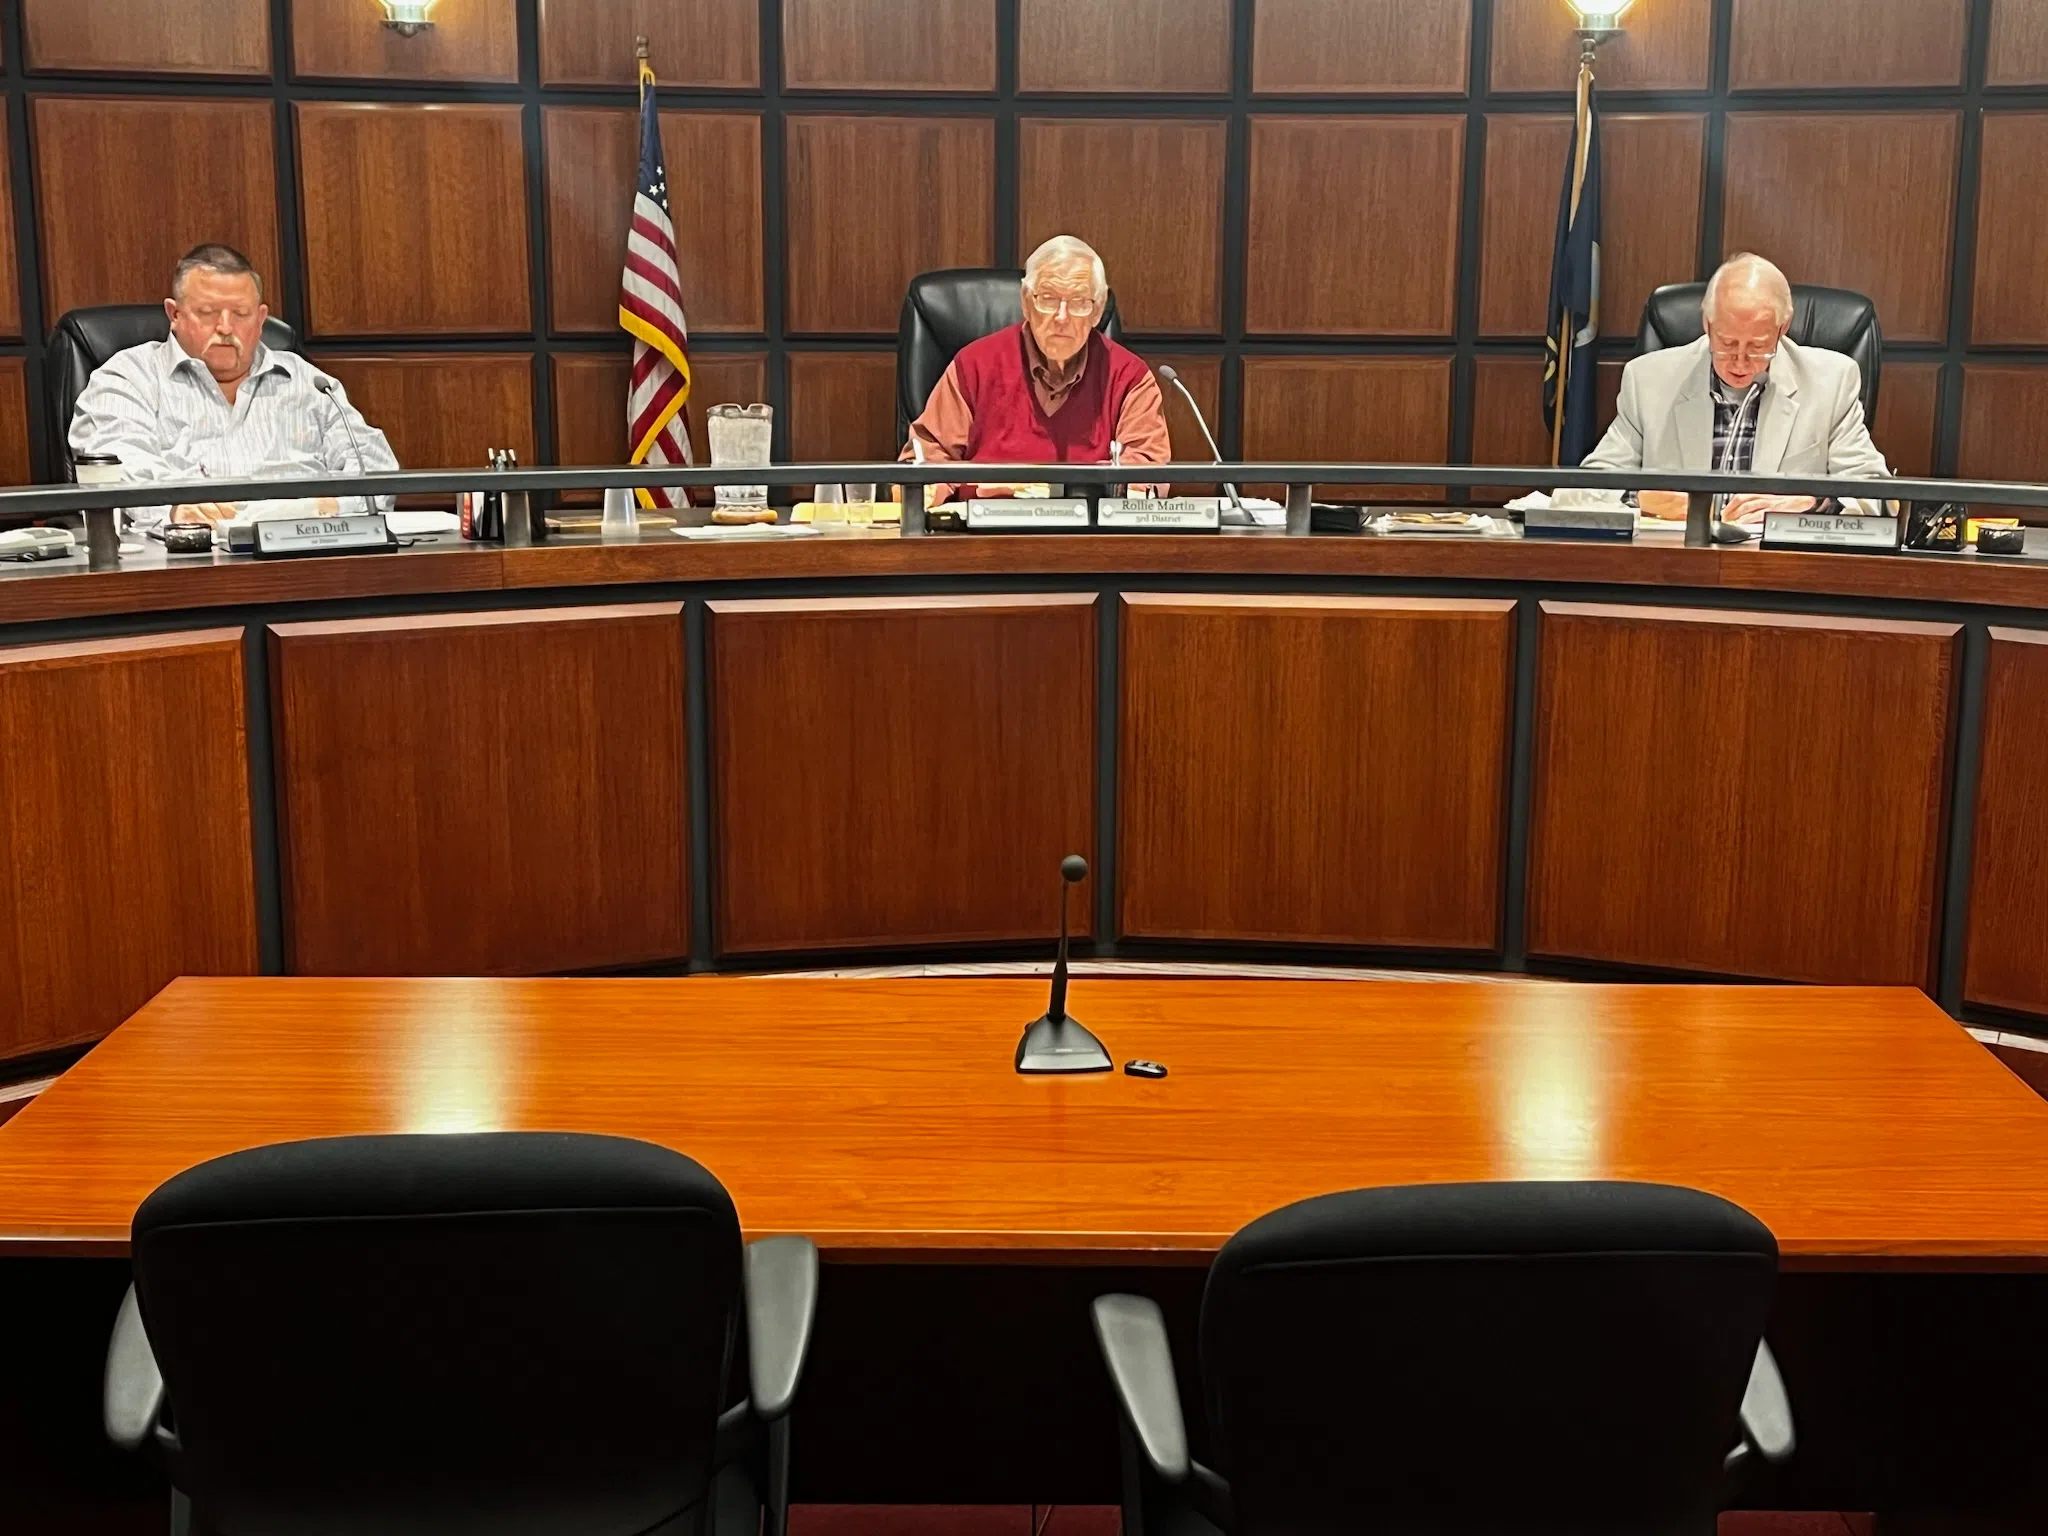 Unbound organizers present race schedule and proposed road closure during Lyon County Commission weekly action meeting Thursday